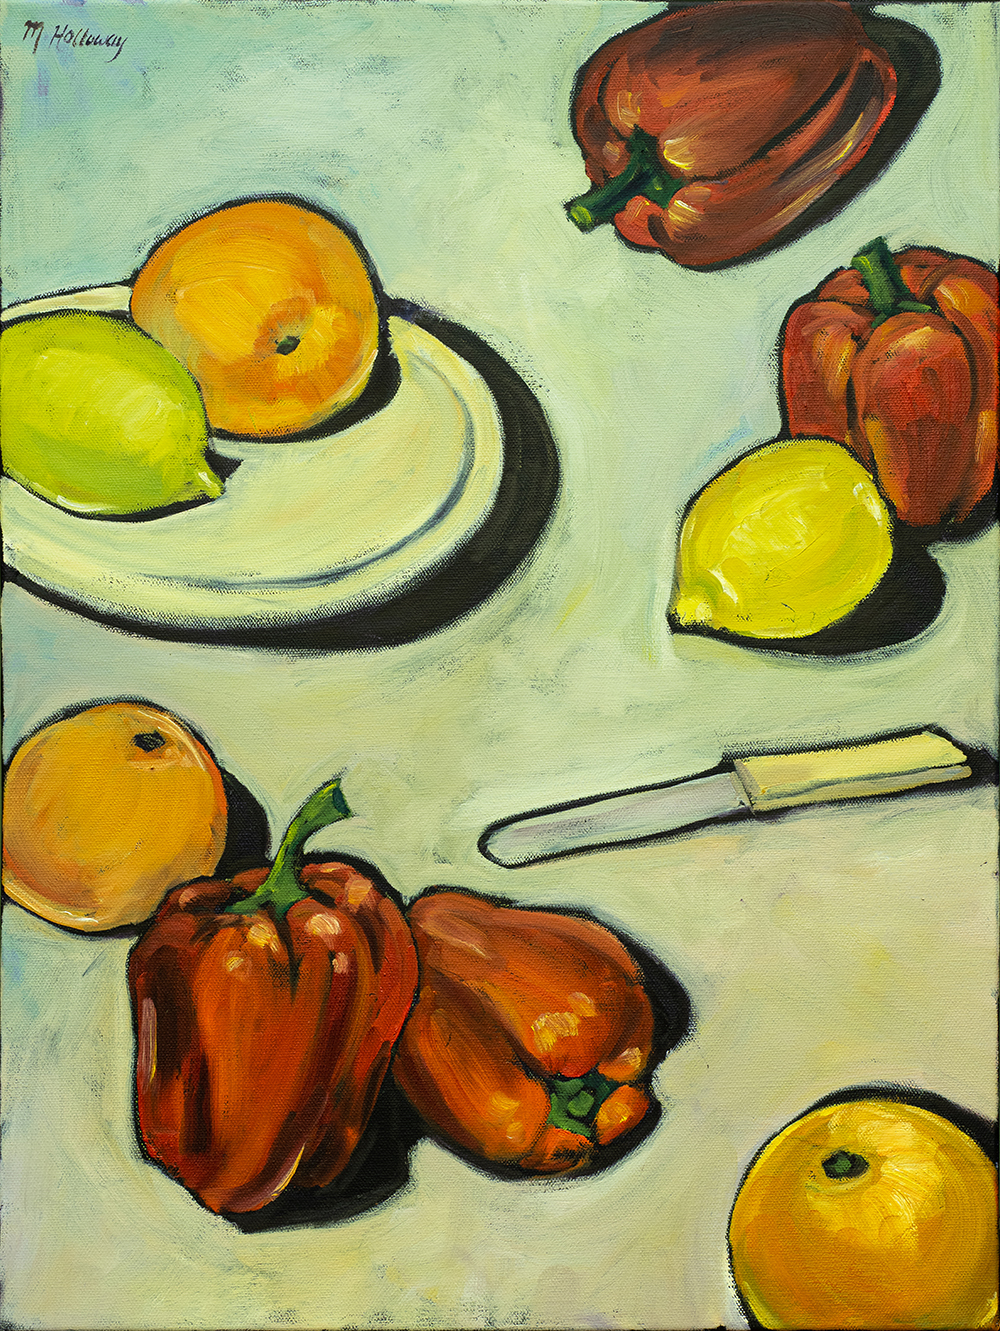 Painting of fruit and vegetables on a plate and table with a knife.